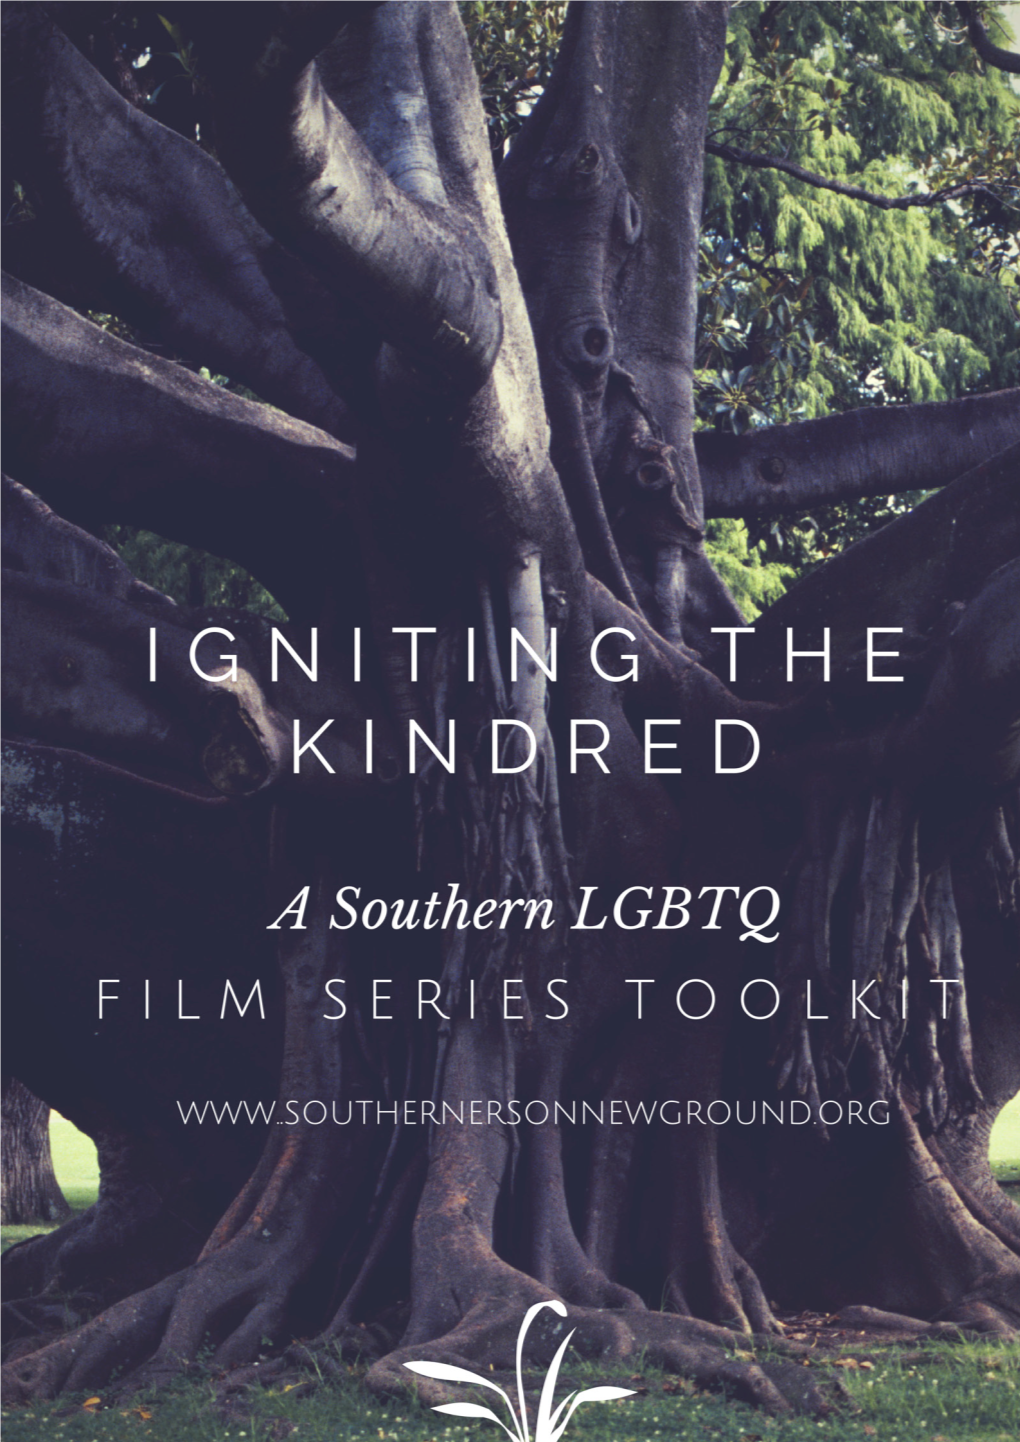 A SONG Film Series Toolkit